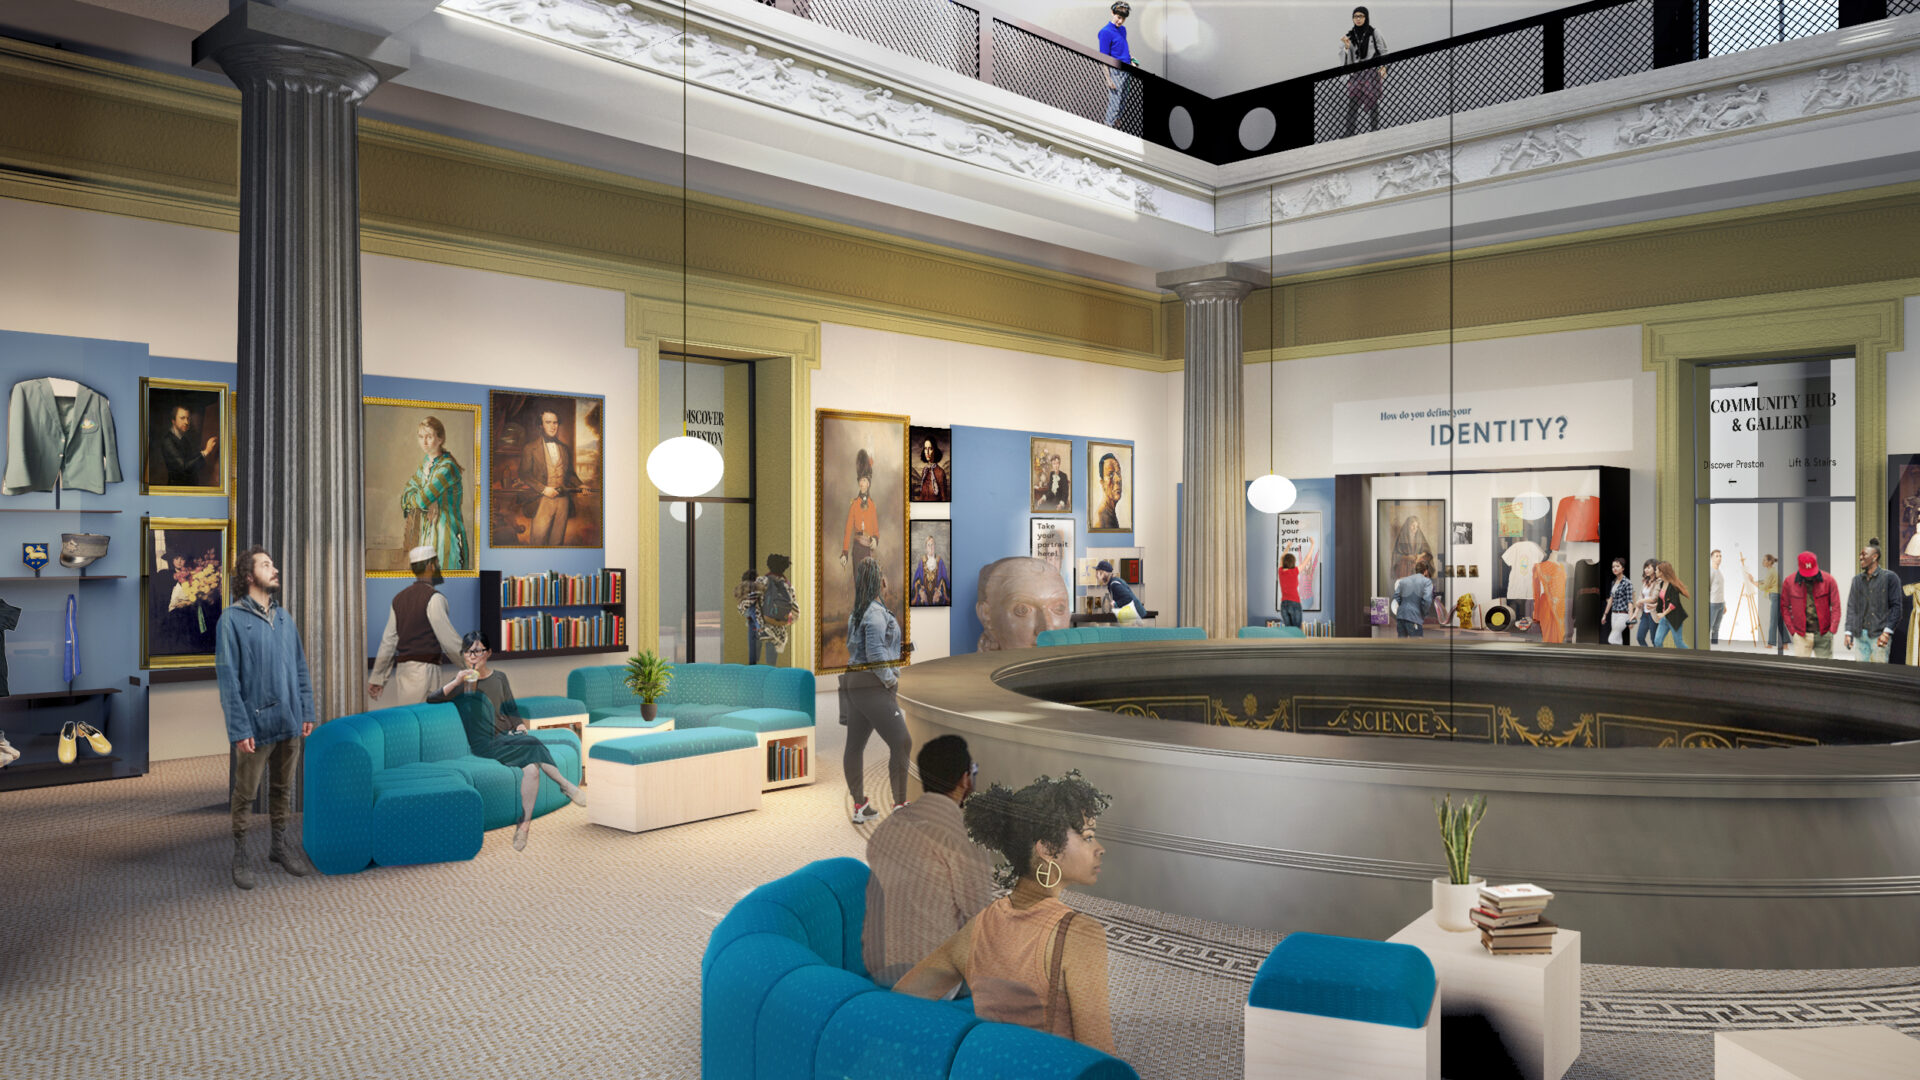 Image of people sat on plush blue seating and interacting with The Harris collections in large display cases.